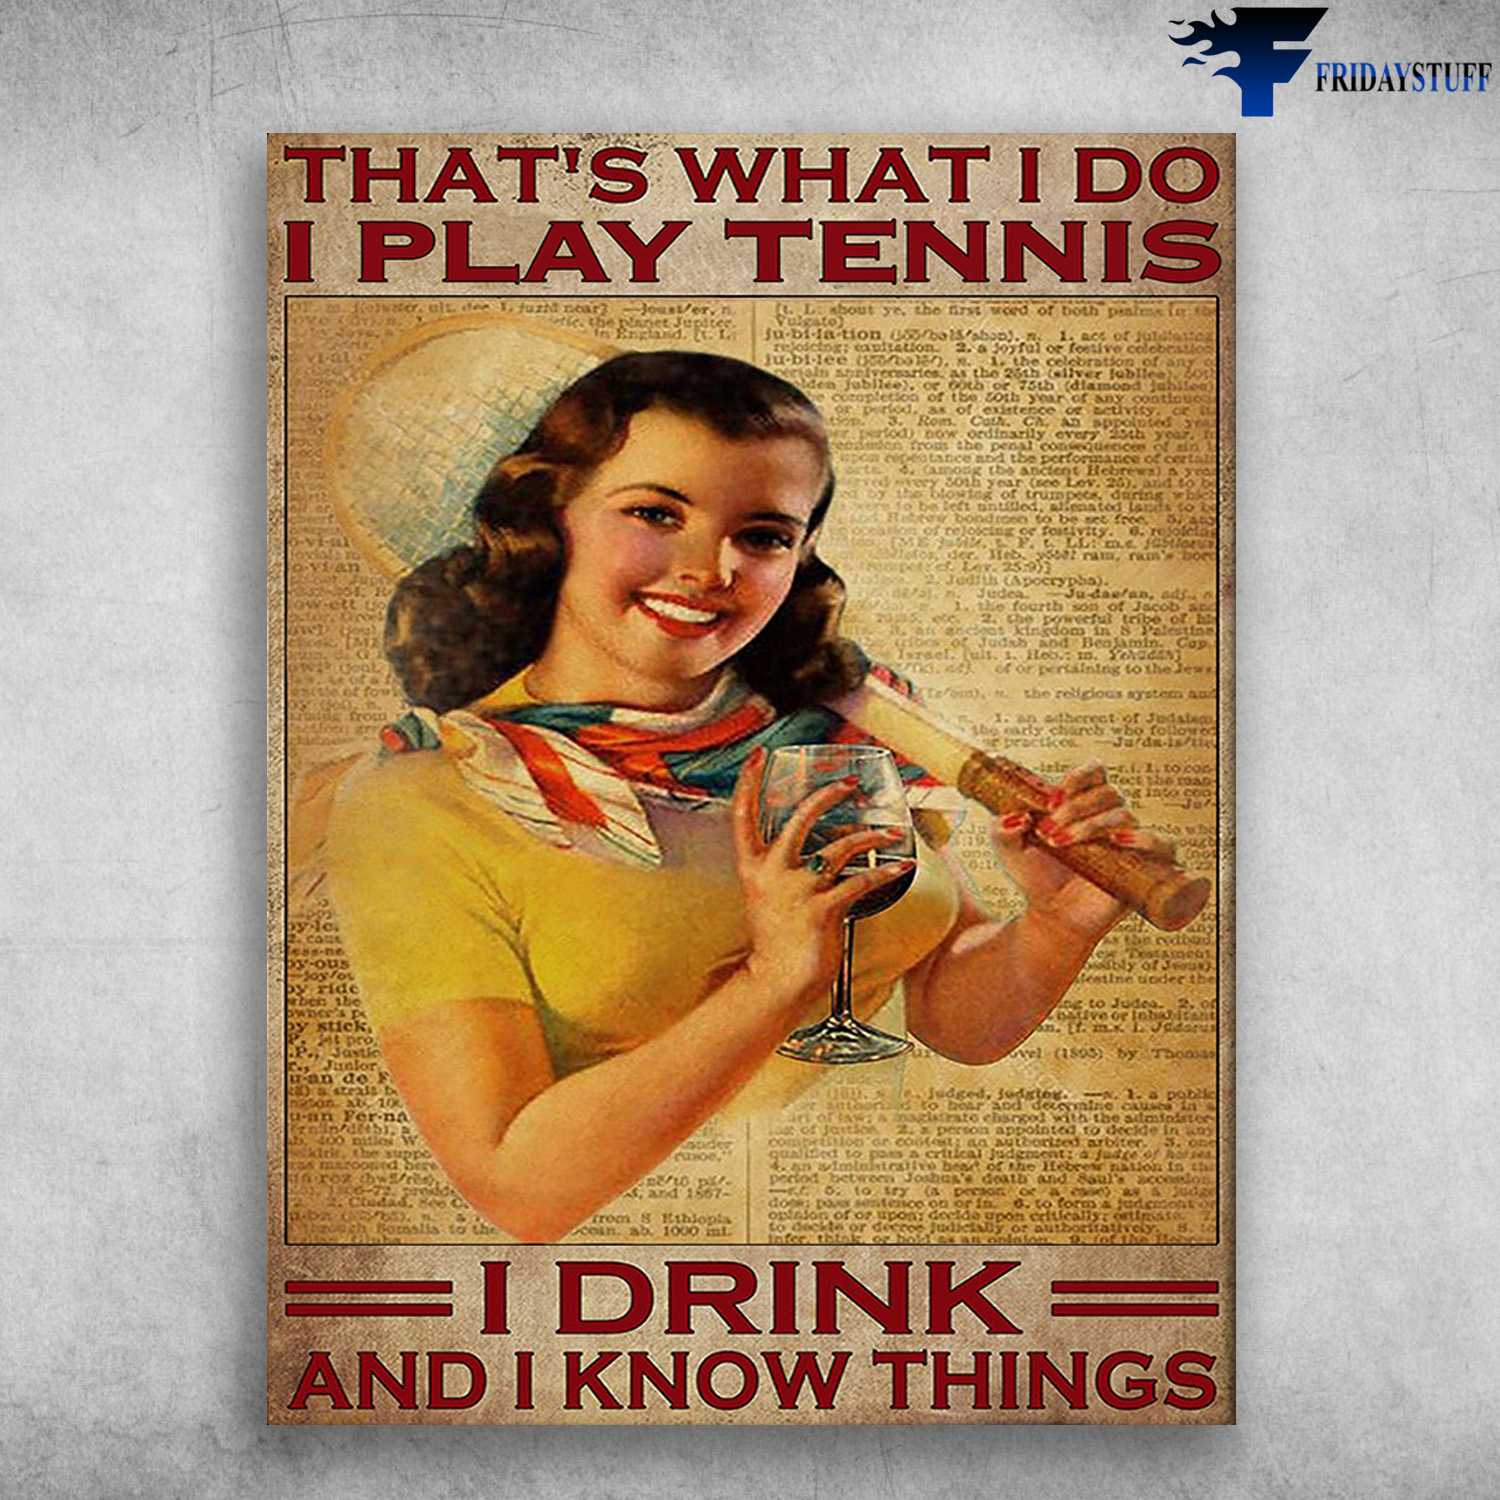 Tennis Girl, Wine Lover, Tennis And Wine - That What I Do, I Play Tennis, I Drink, And I Know Things